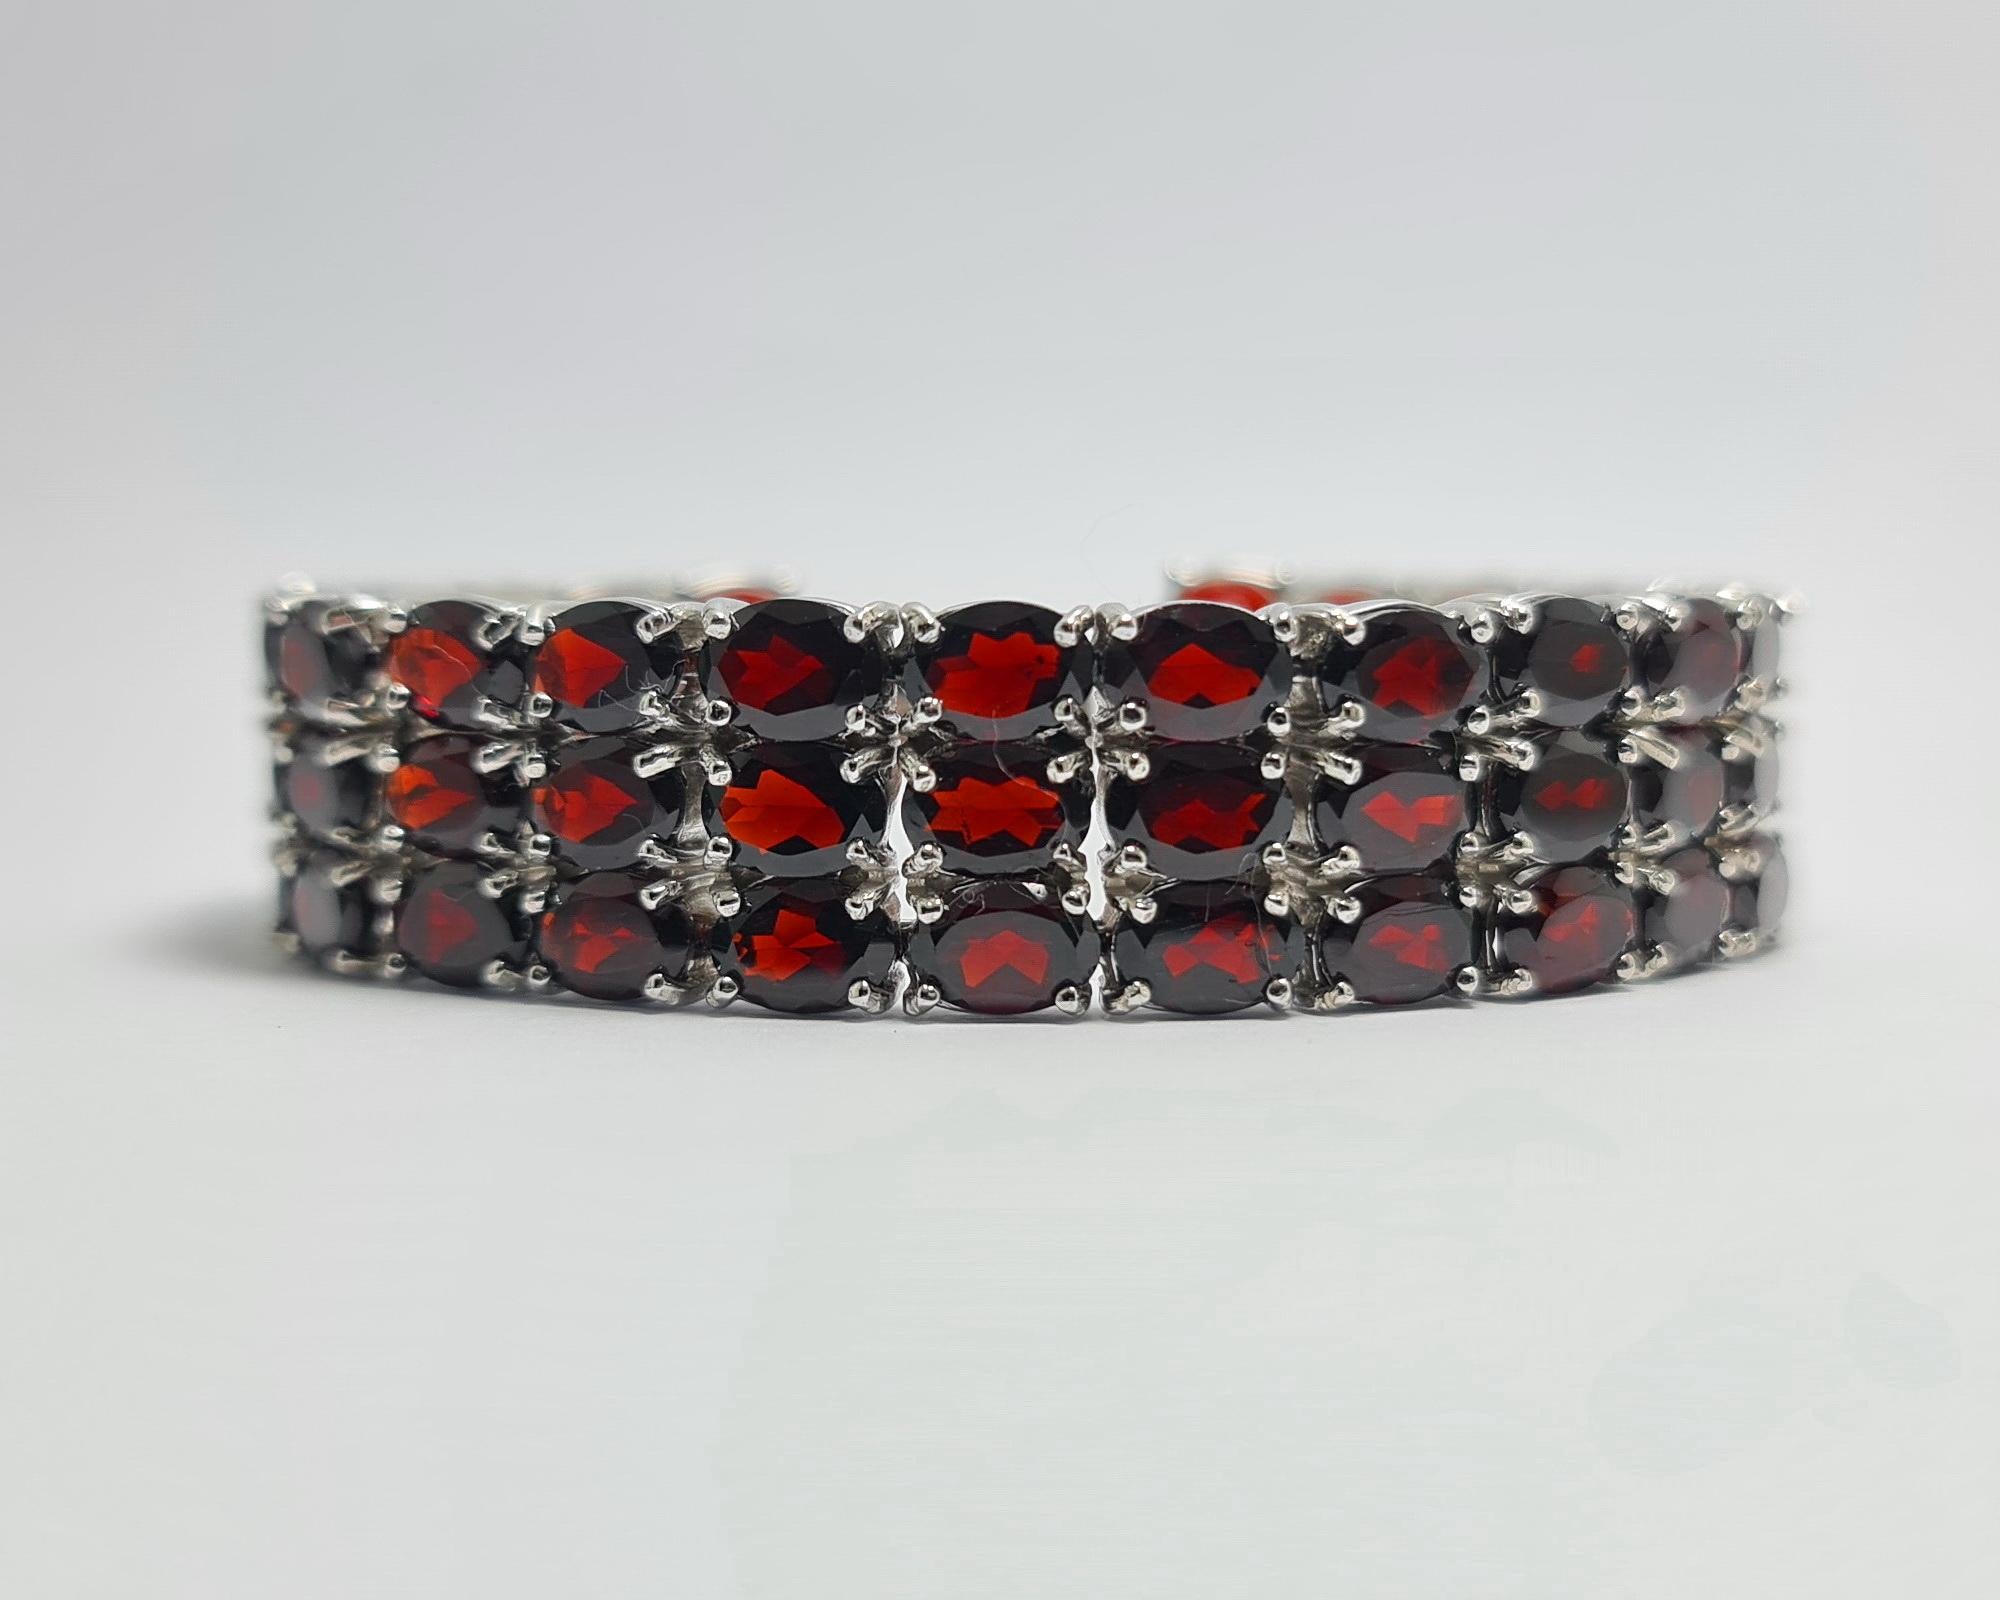 Natural Red Garnet 3 Row Wide Tennis Bracelet set in Pure .925 Sterling Silver with Rhodium Plating

Carat weight: 65 carats
Total bracelet weight: 49 grams